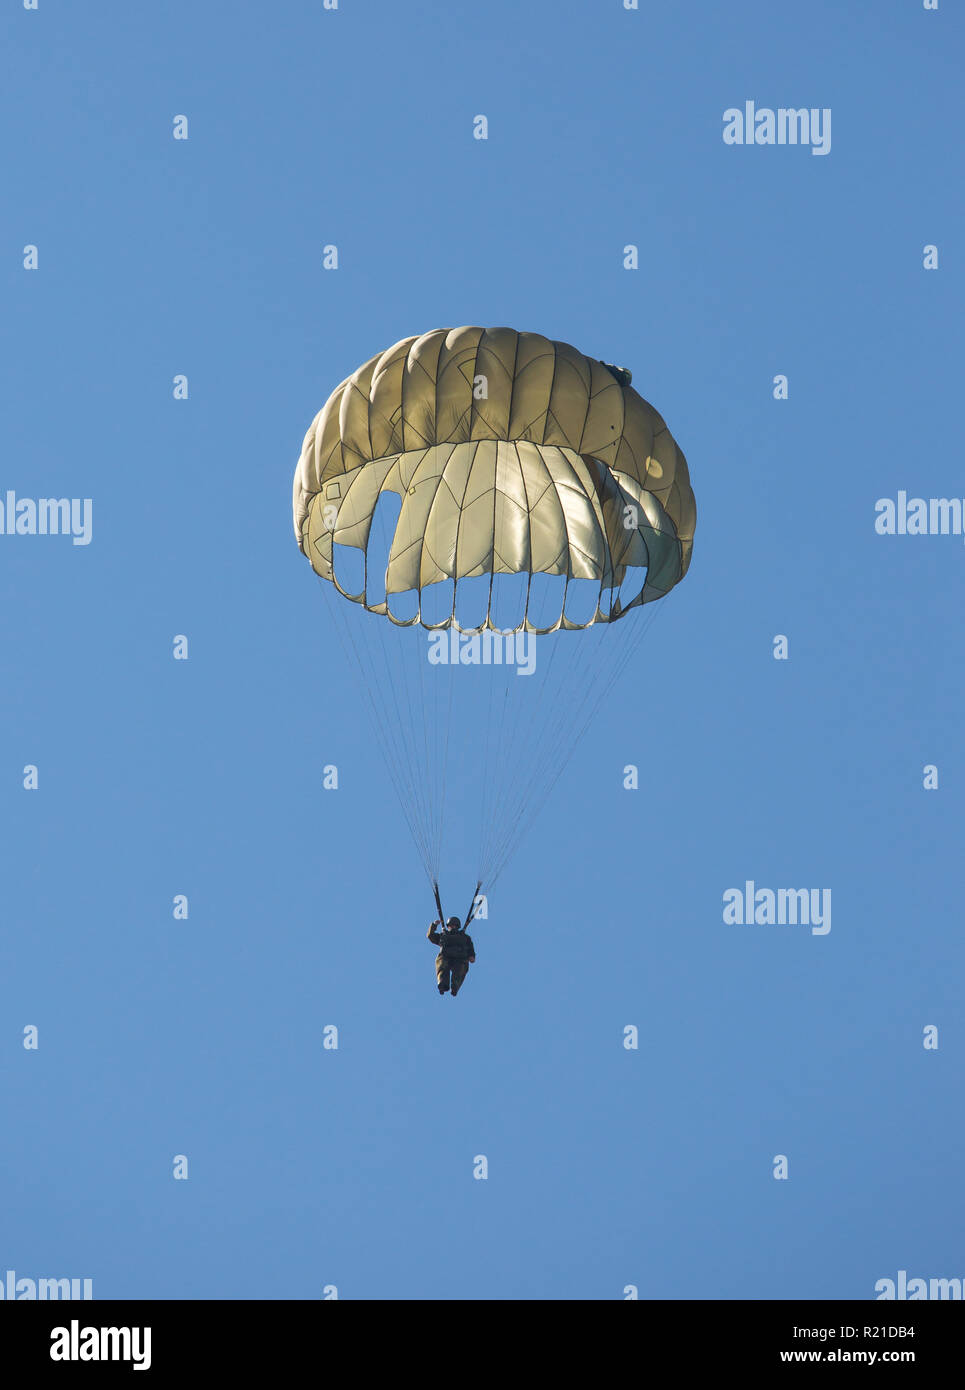 MONROE, NC (USA) - November 10, 2018:  An army paratrooper floats to the ground during a demonstration at the Warbirds Over Monroe Air Show. Stock Photo